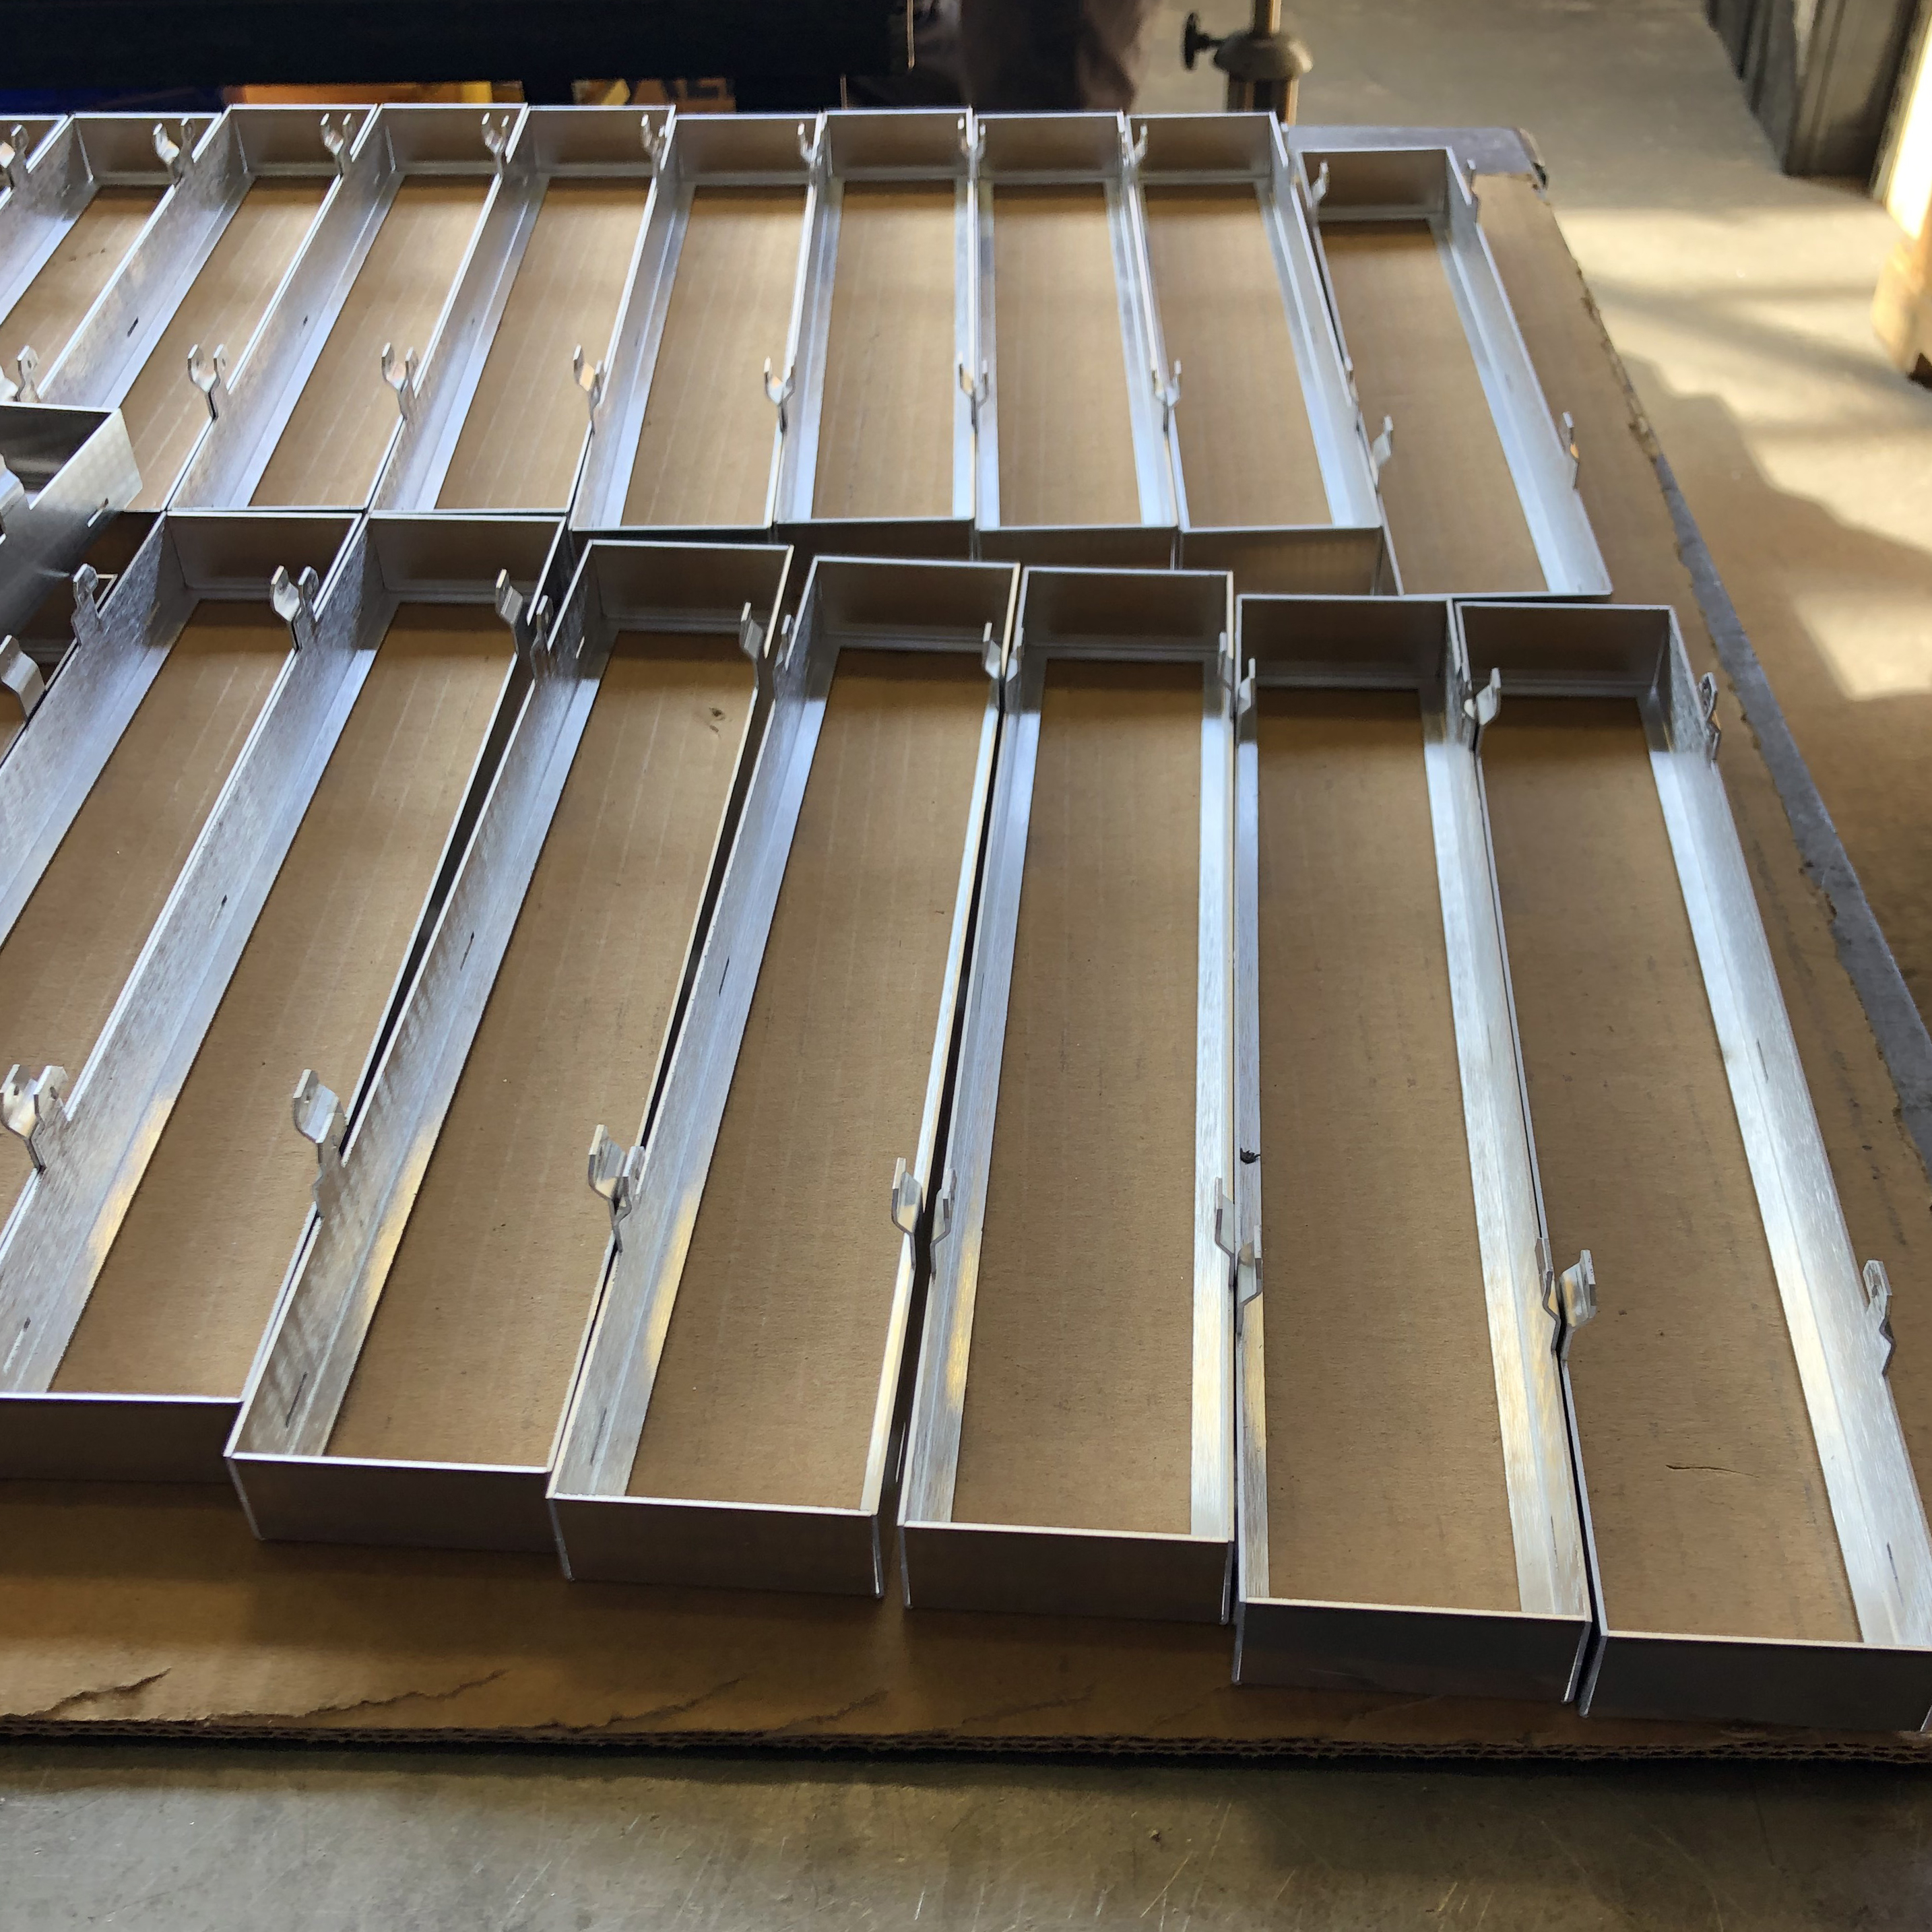 Ketra Hexcel Louvers, empty frames (in production)